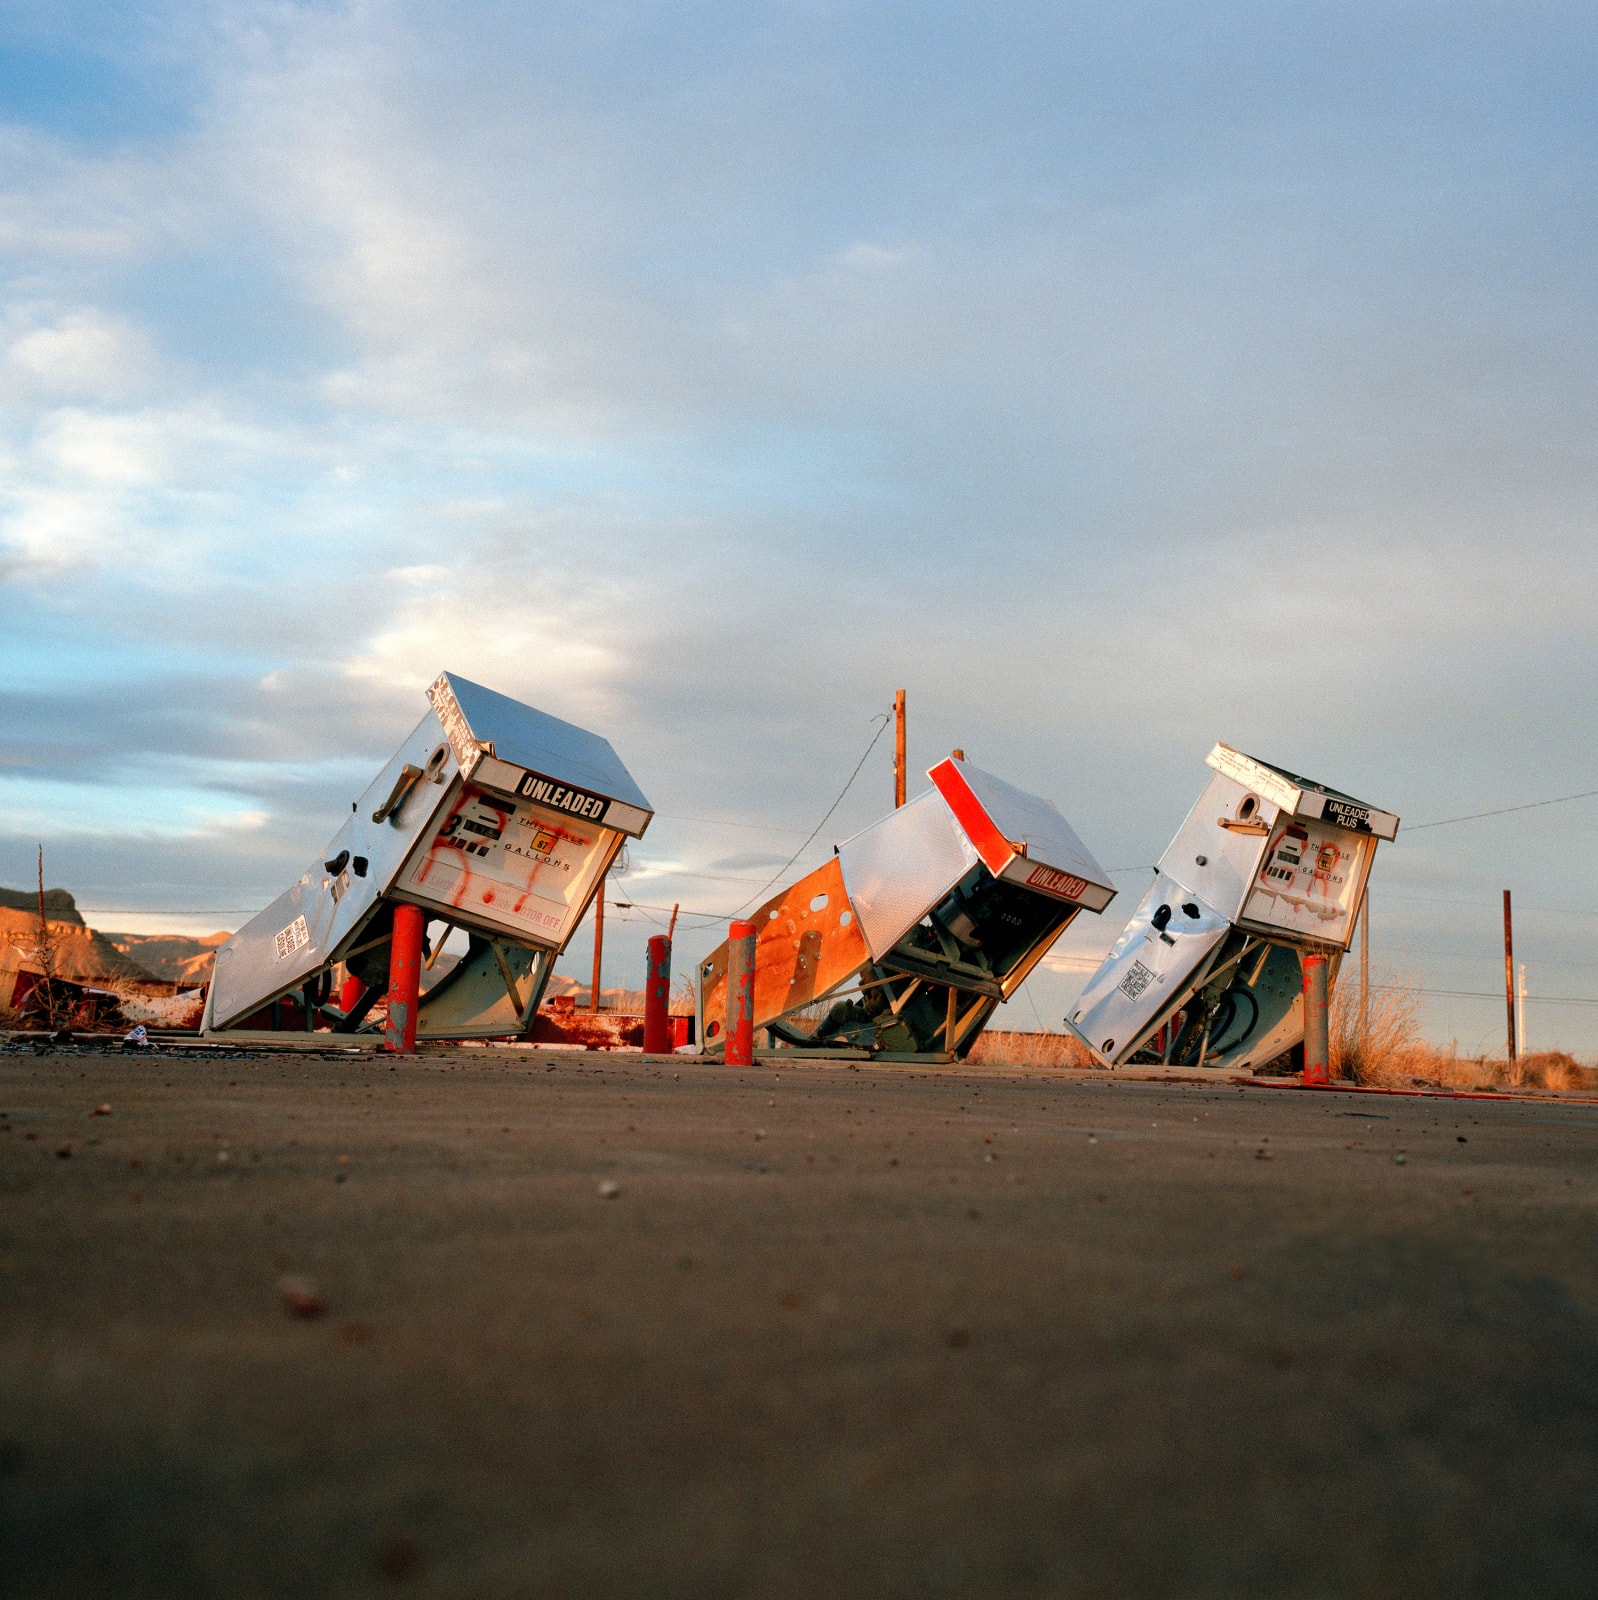 Jeff Brouws, West Motel Drive, Lordsburg, New Mexico, 2001